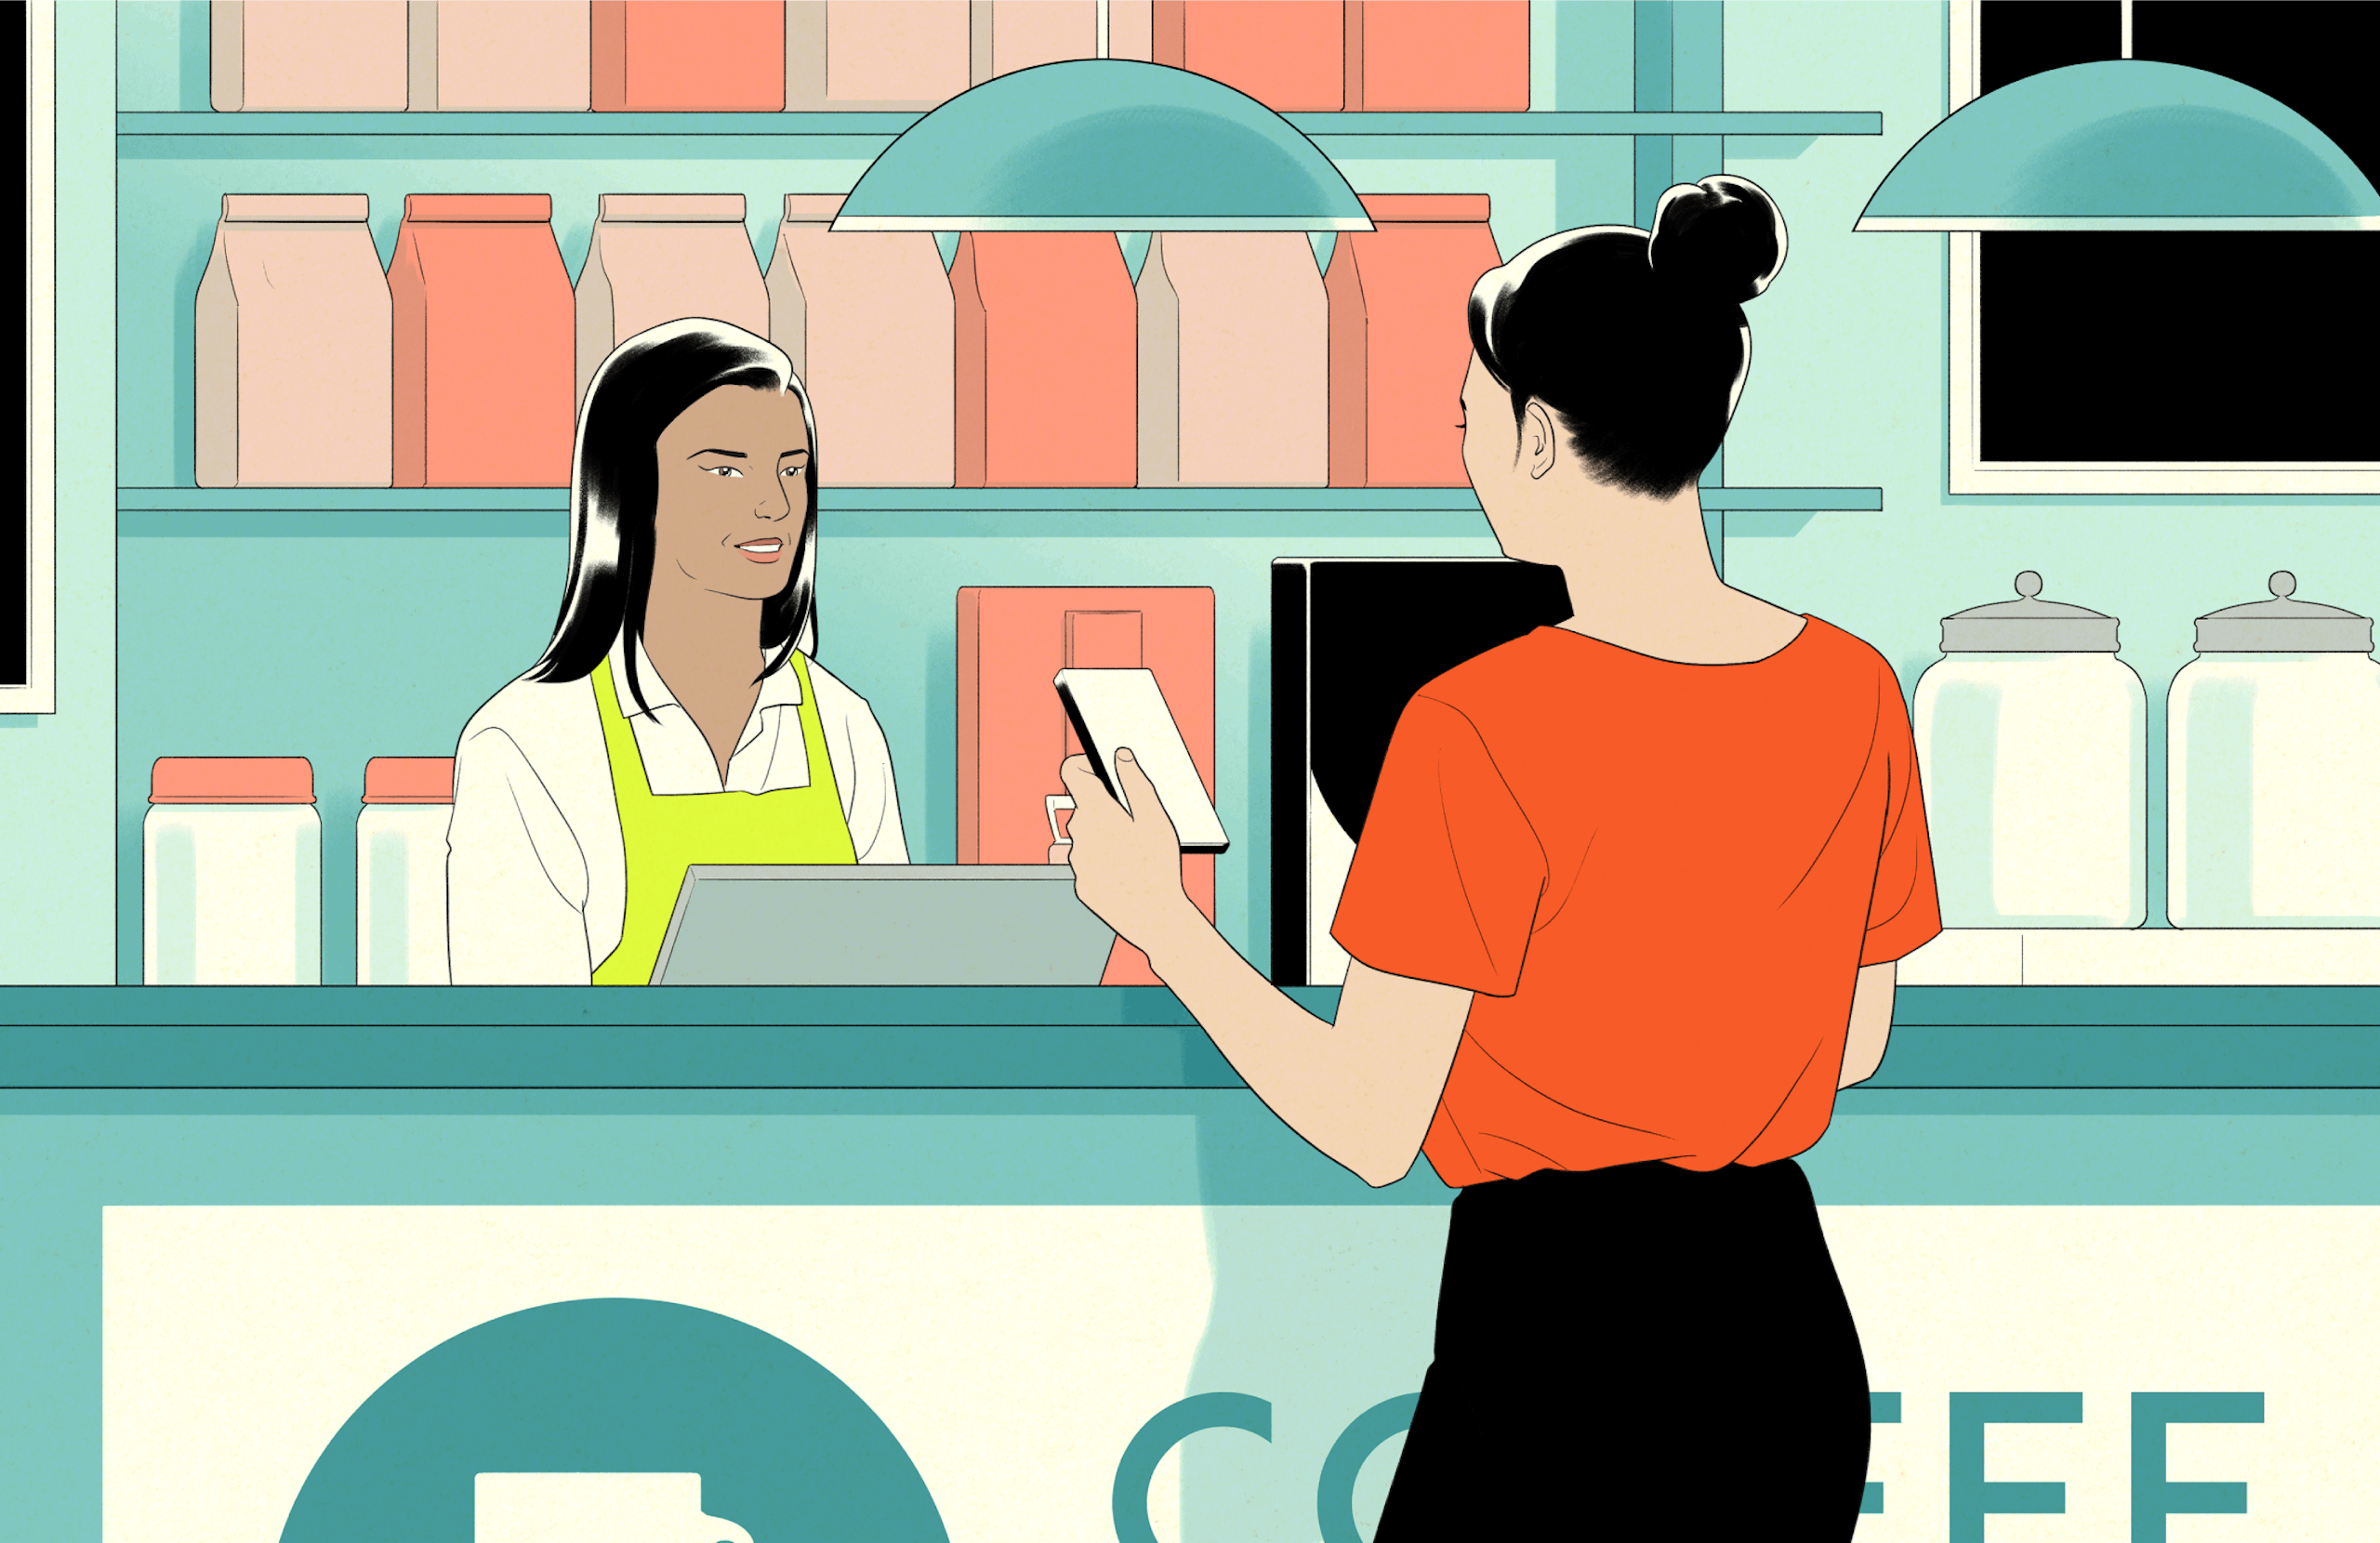 Illustration of woman at a coffee shop checkout counter interacting with barista